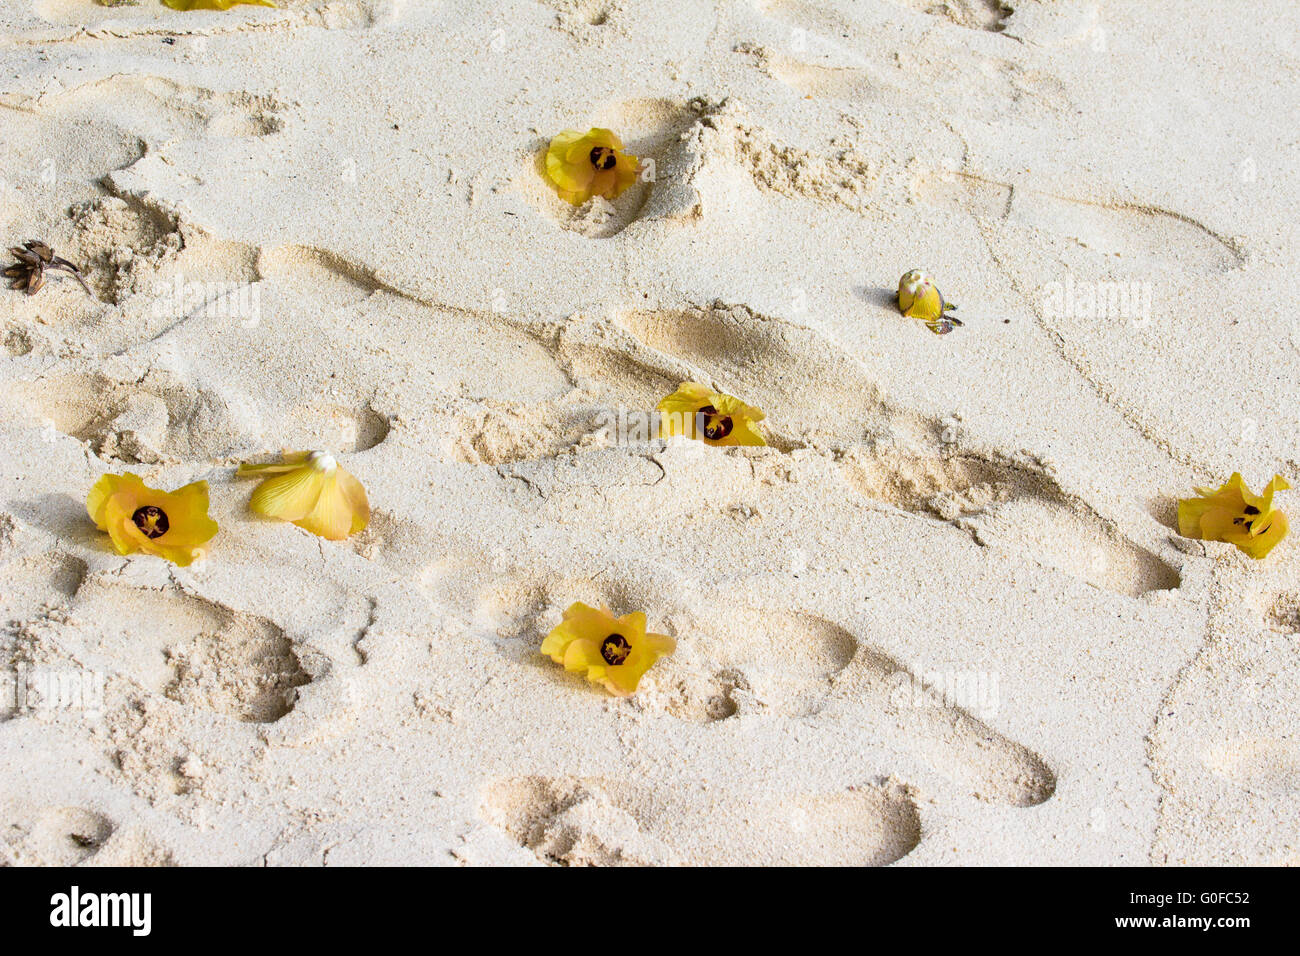 Hibiscus blossoms and footprints in the sand at a beach Stock Photo